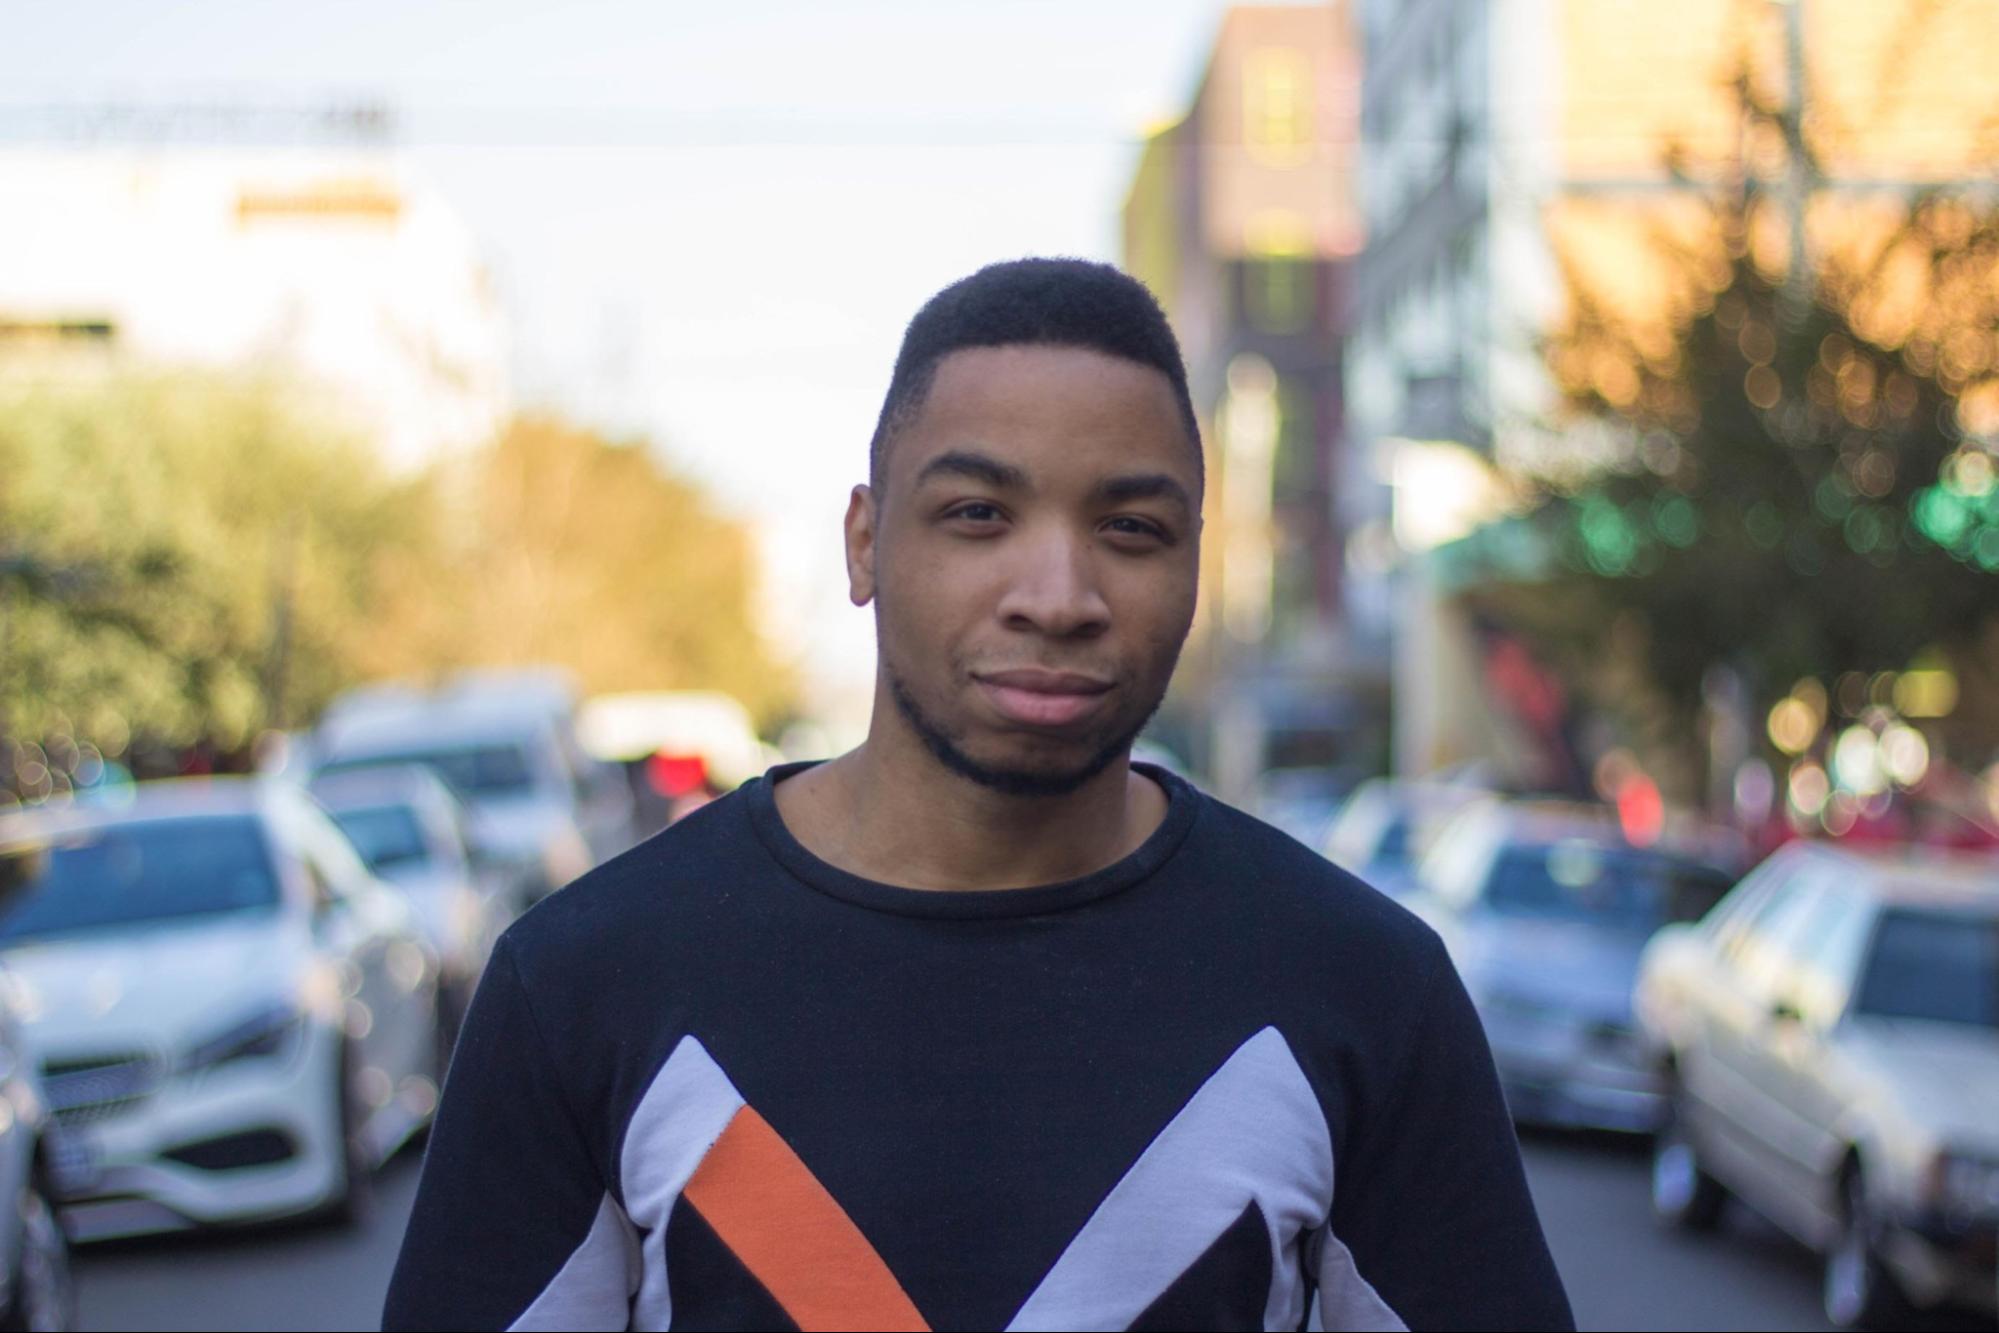 Against a blurry outdoor street scene, a Black man in a dark top smiles at the camera